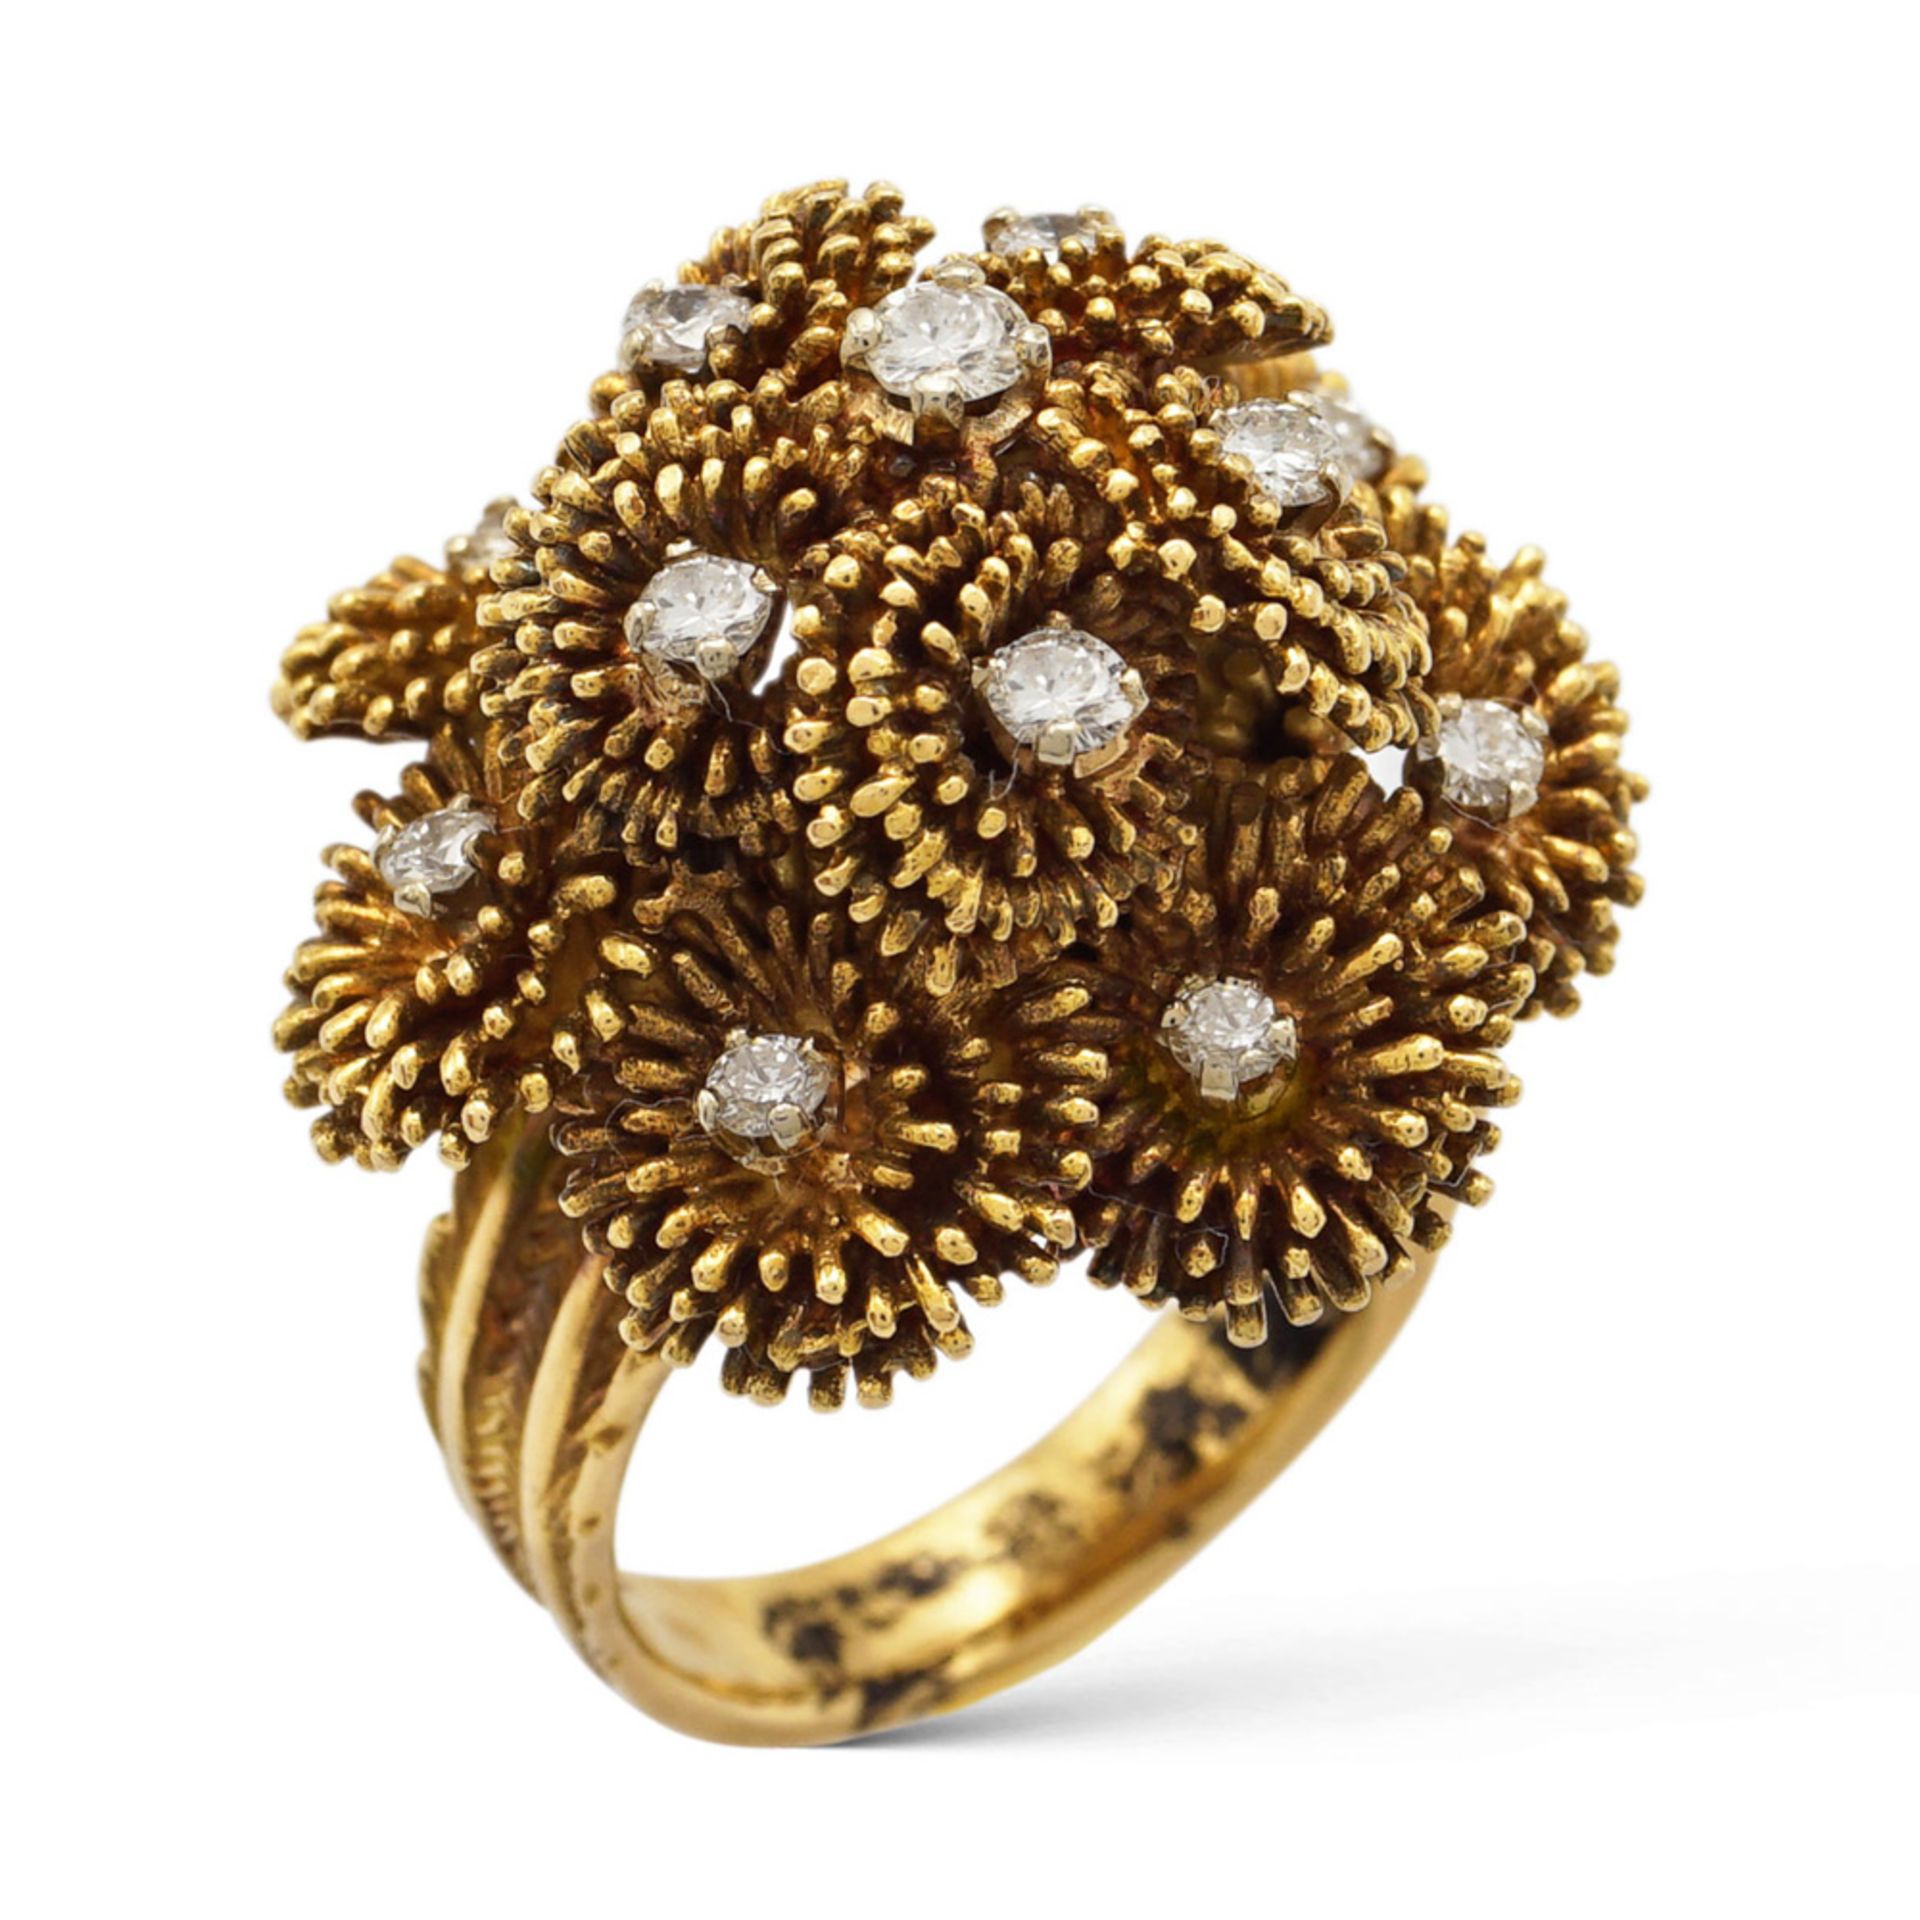 18kt yellow gold and diamonds floral pattern ring French marks, 1950/60s